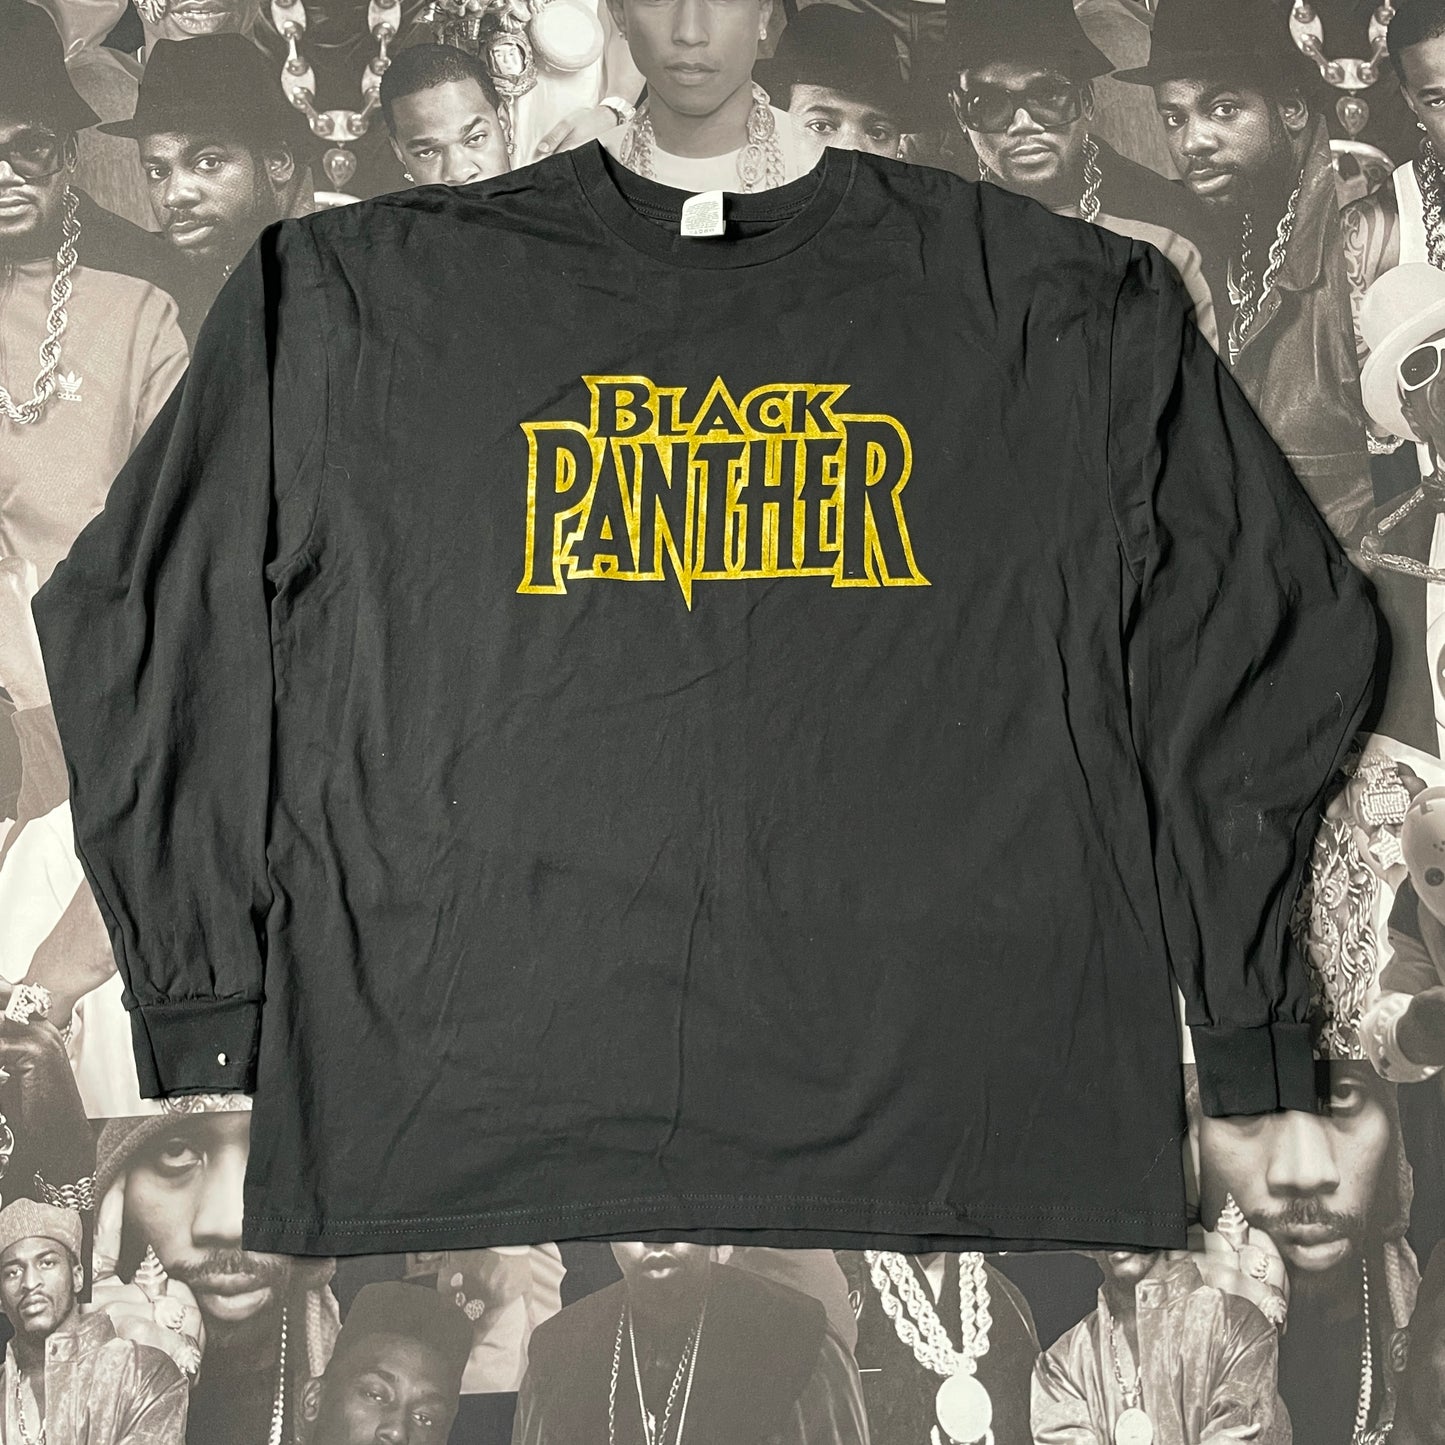 Black Panther Promo Long Sleve Tee in Black Size XL